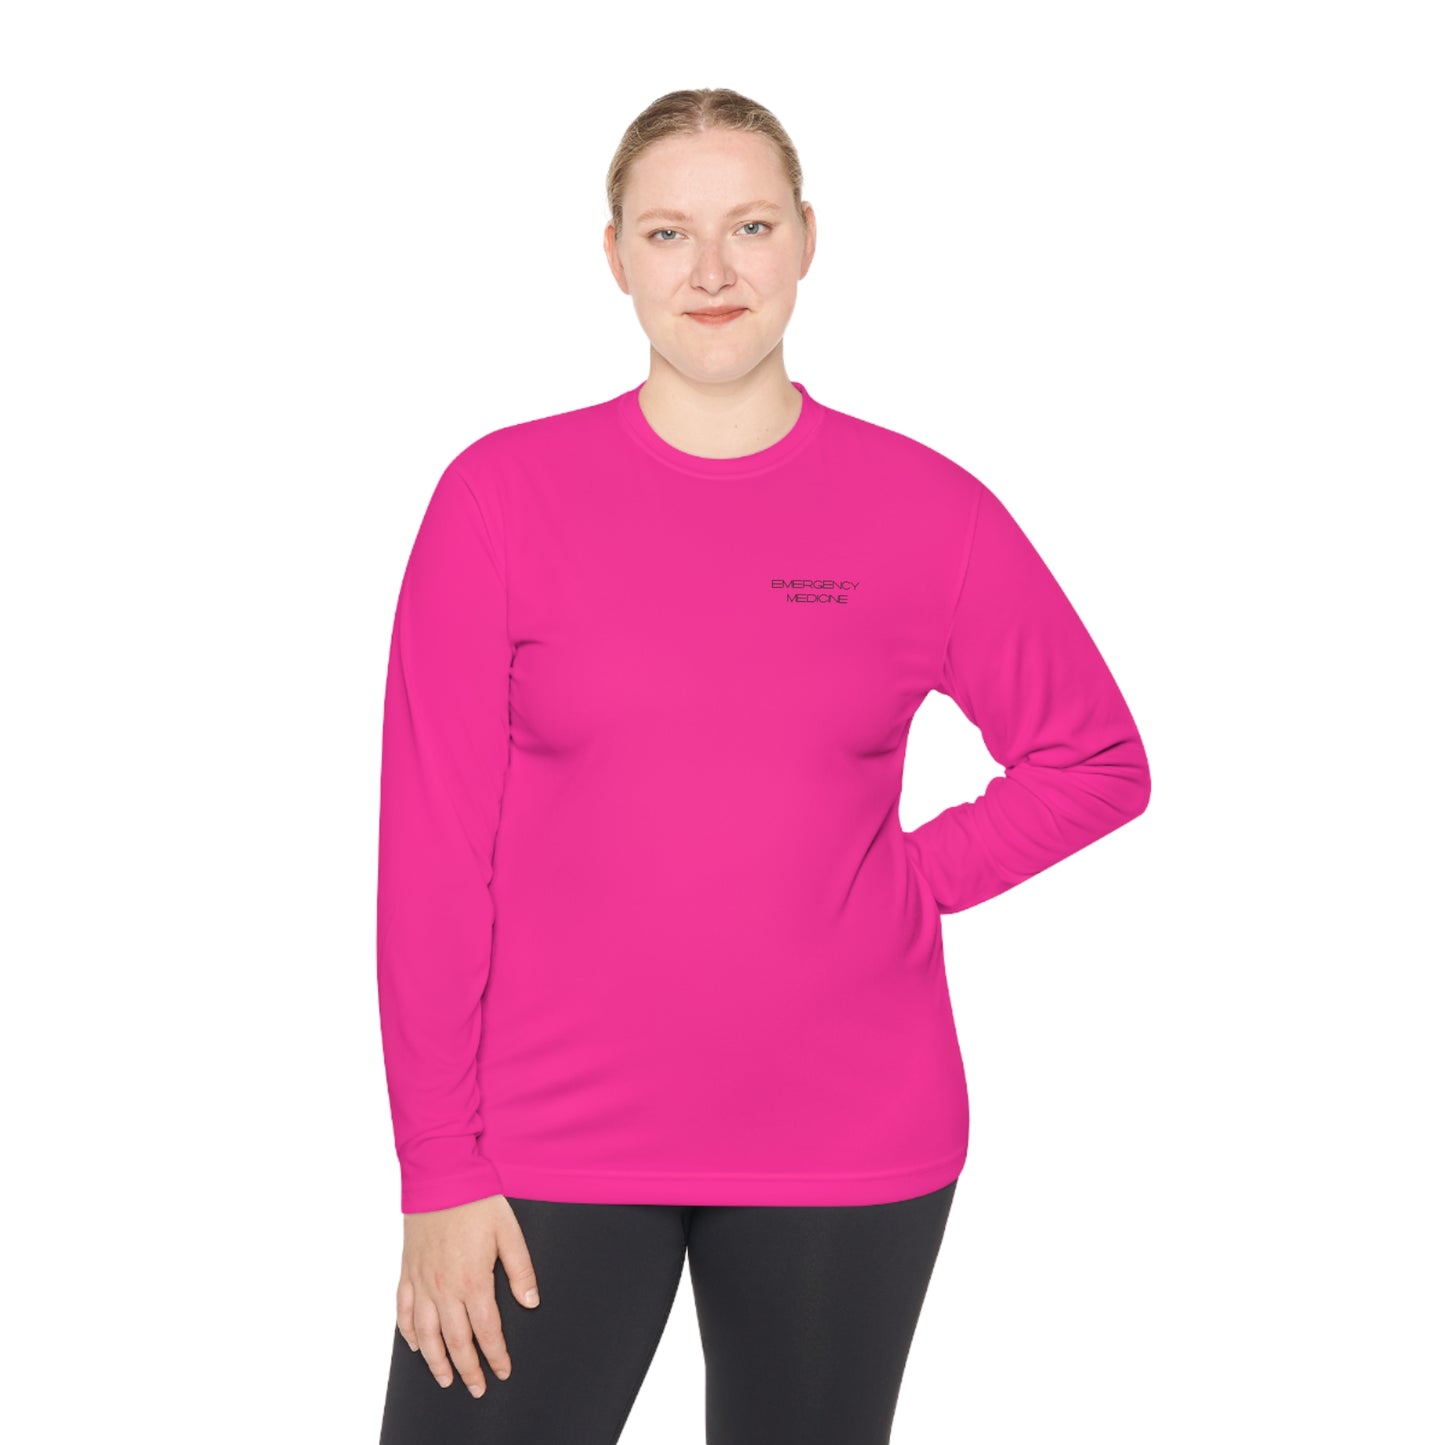 Pick Up the Pace! Funny Athletic Nurse, Doctor, NP, PA, Cardiology Unisex Lightweight Long Sleeve Tee!